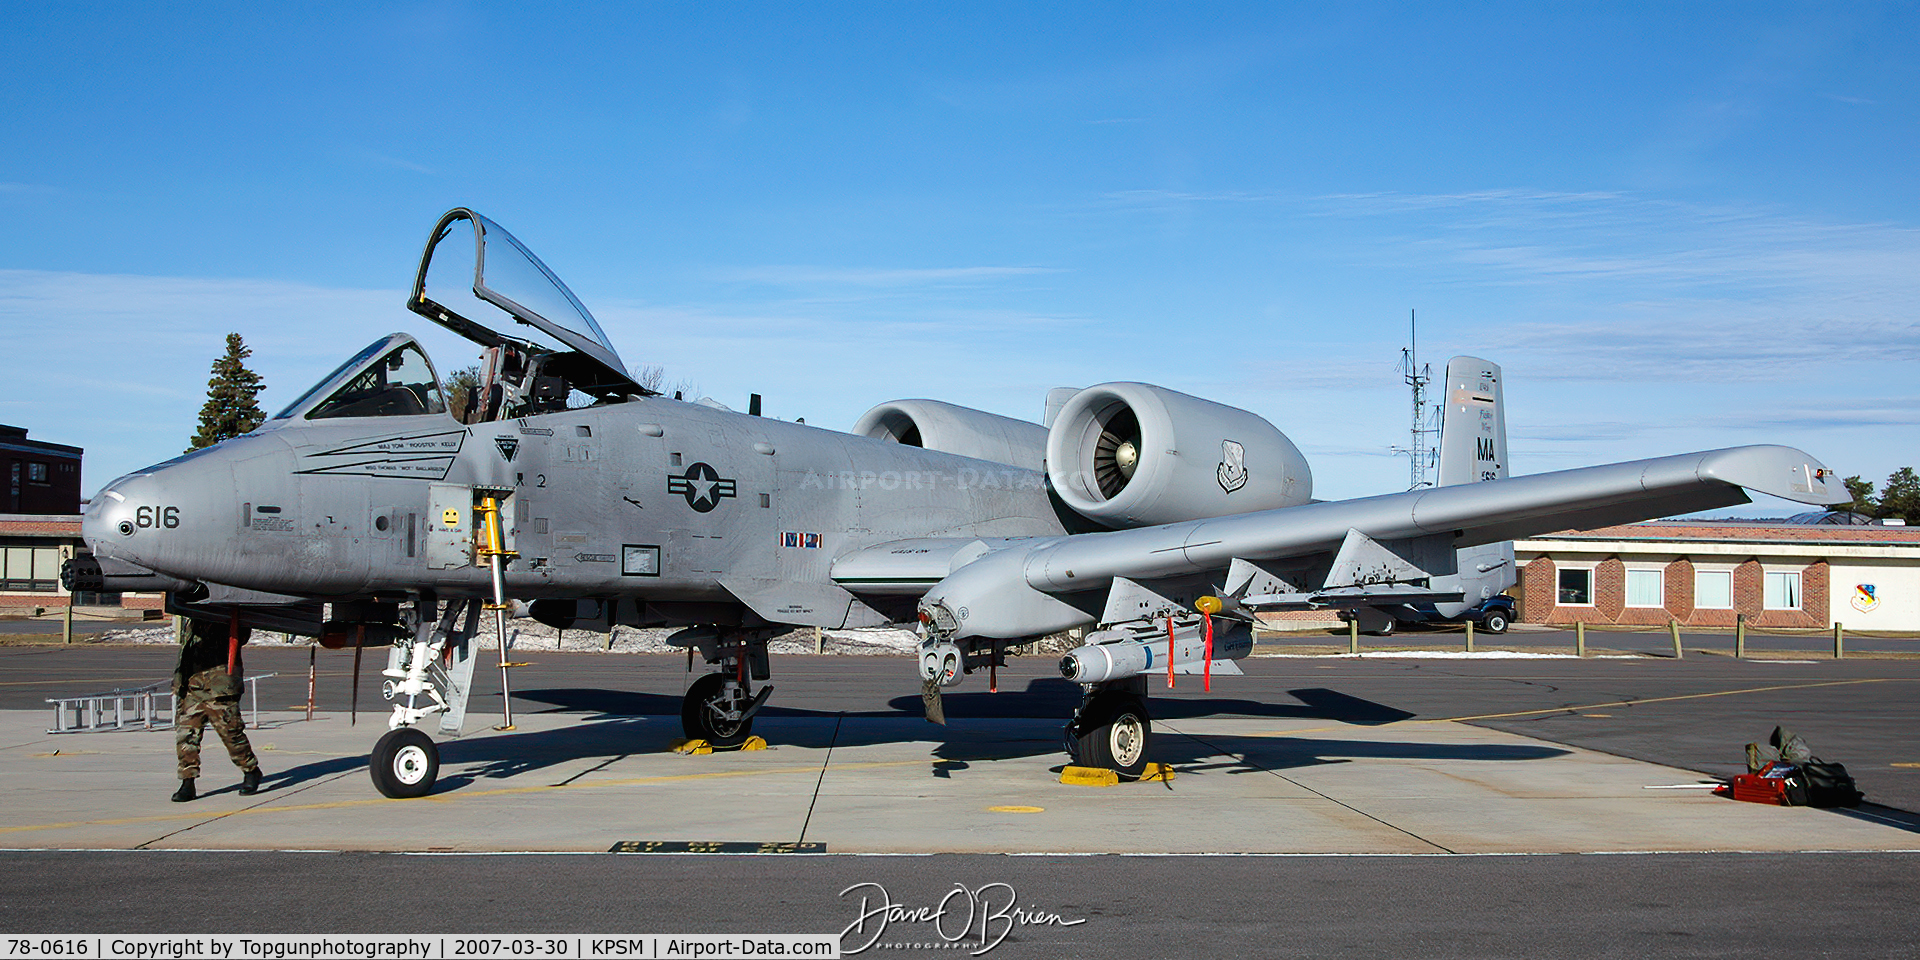 78-0616, Fairchild Republic A-10A Thunderbolt II C/N A10-0236, 616 getting prepped for the morning flight